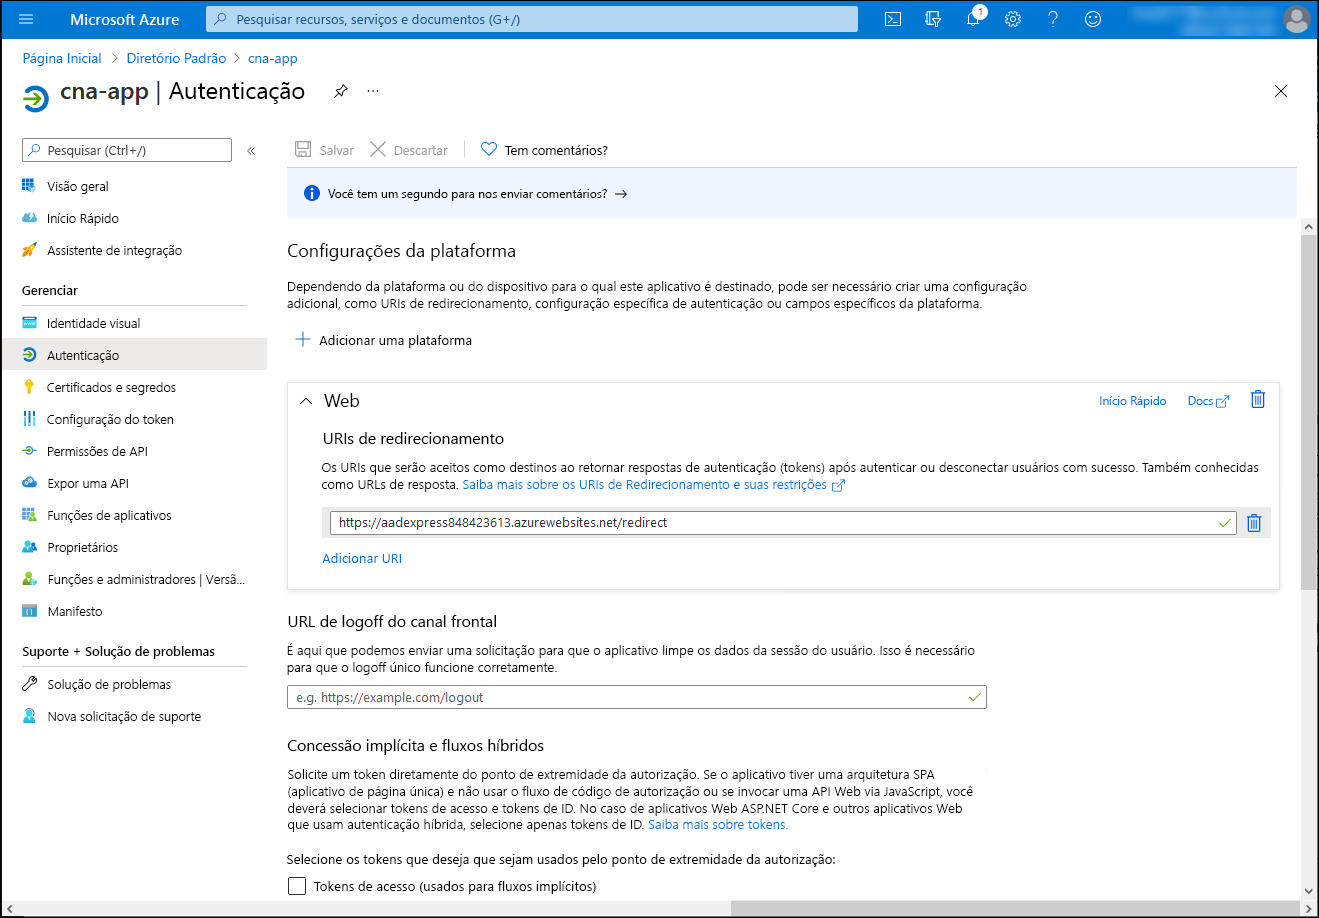 Screenshot of the cna-app Authentication blade in the Azure portal.